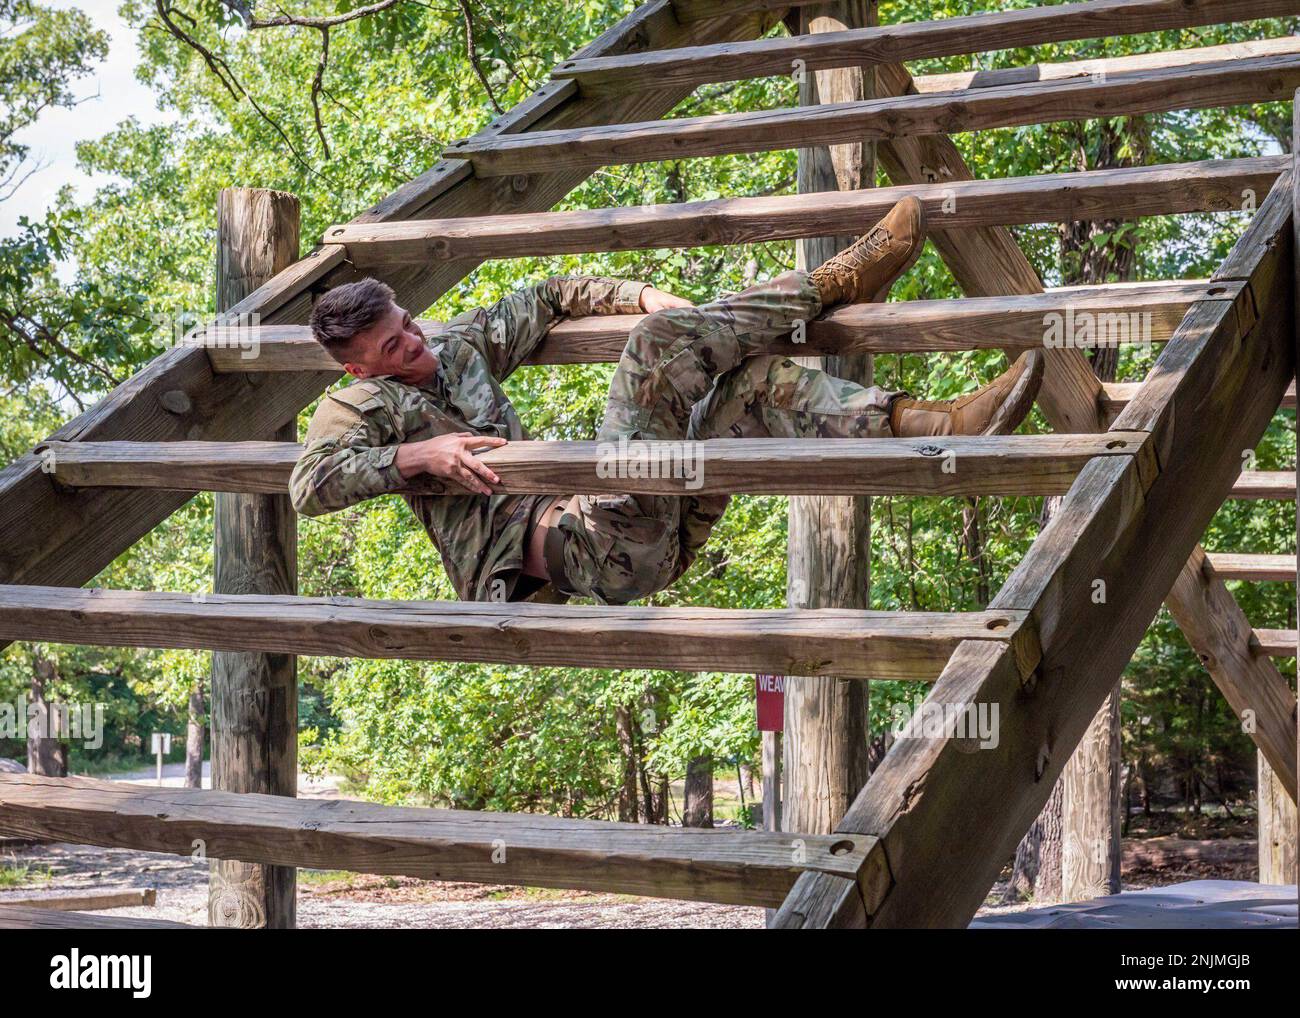 Pfc. Brayden D. Cooper, an Army Explosive Ordnance Disposal technician from the 763rd Ordnance Company (EOD), pulls up between the wooden planks that up station three – called “The Weaver” – of Fort Leonard Wood’s Confidence Course, July 1, at Training Area 97.  Cooper was training for the U.S. Army Air Assault School.  U.S. Army photo by Angi Betran, Fort Leonard Wood Public Affairs Office. Stock Photo